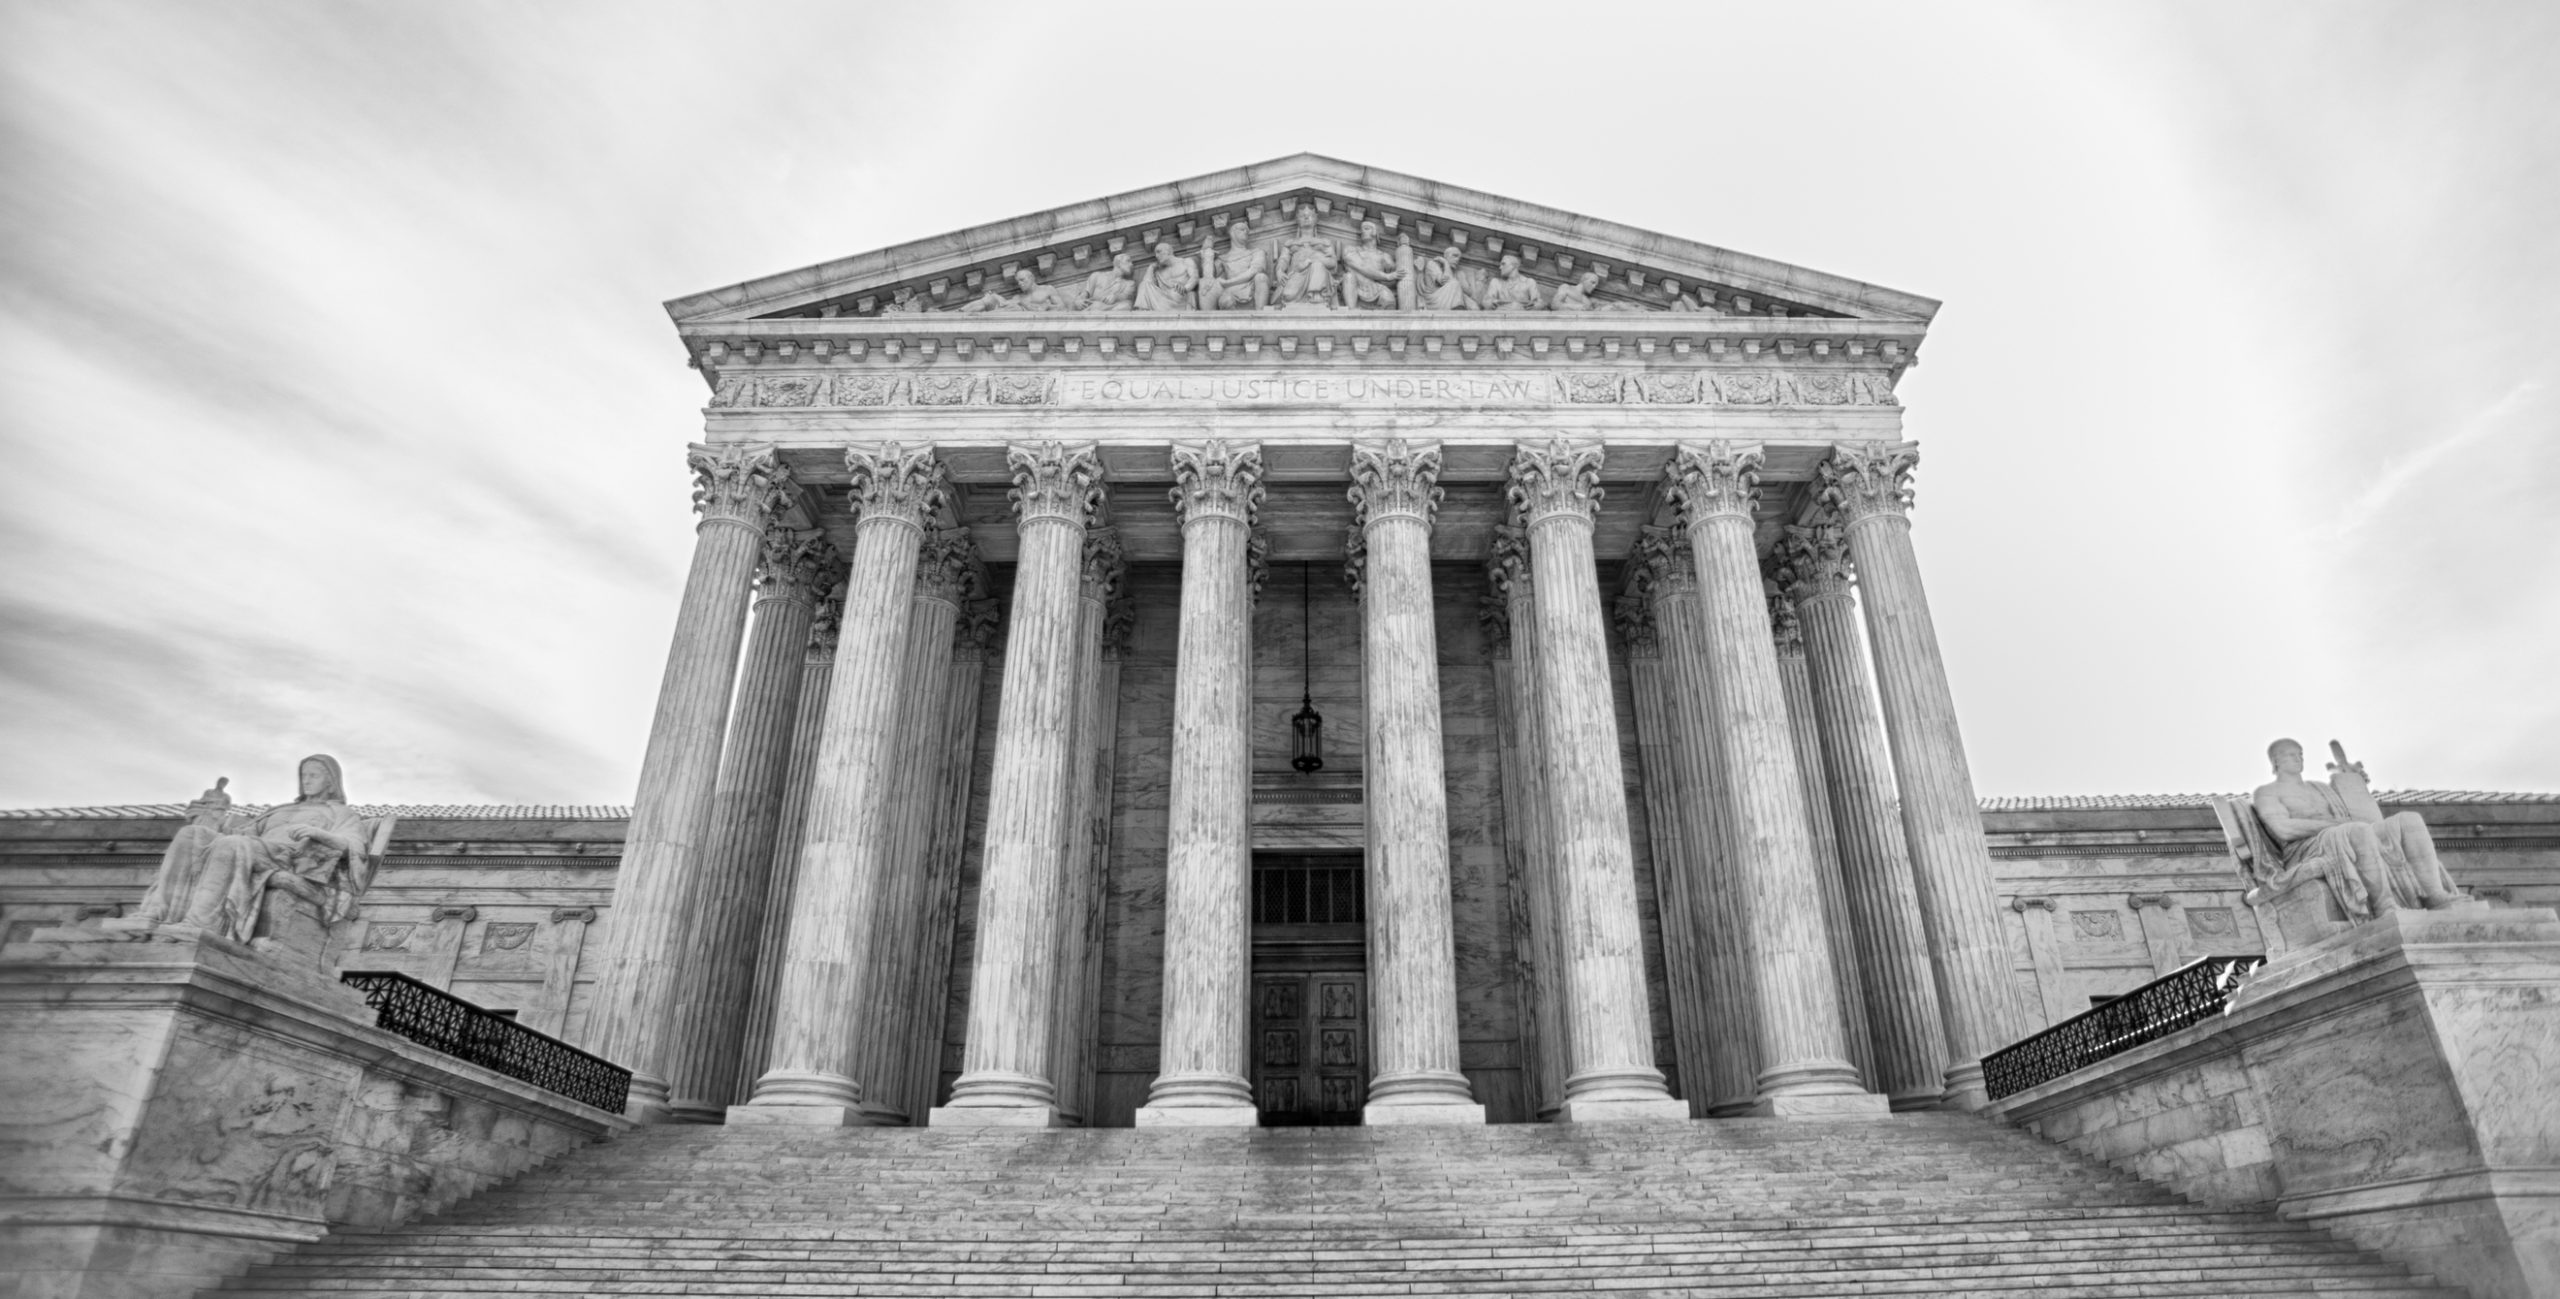 The U.S. Supreme Court this week denied requests to fast-track an appeal of the Texas v. Azar/U.S. lawsuit. Supreme Court photo by Rena Schild/Shutterstock